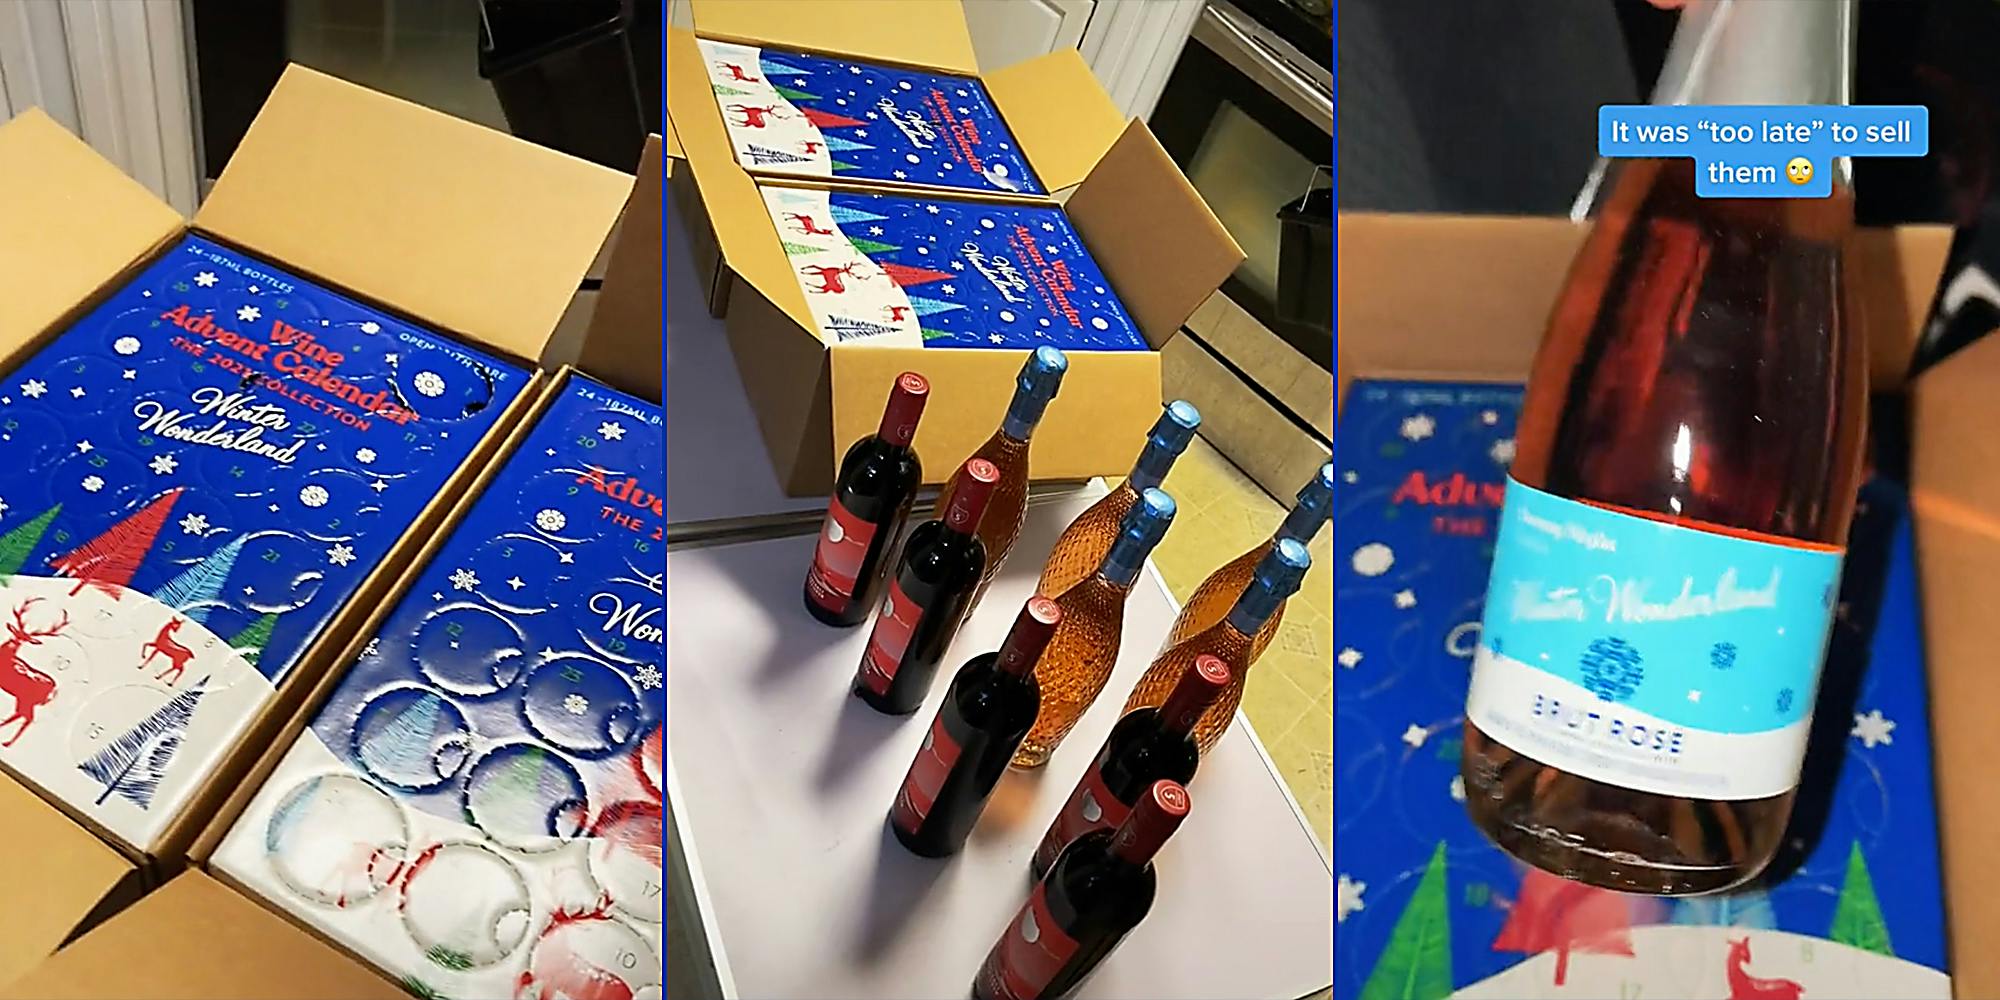 ‘So much beer and wine’ Dumpster diver discovers unopened wine advent